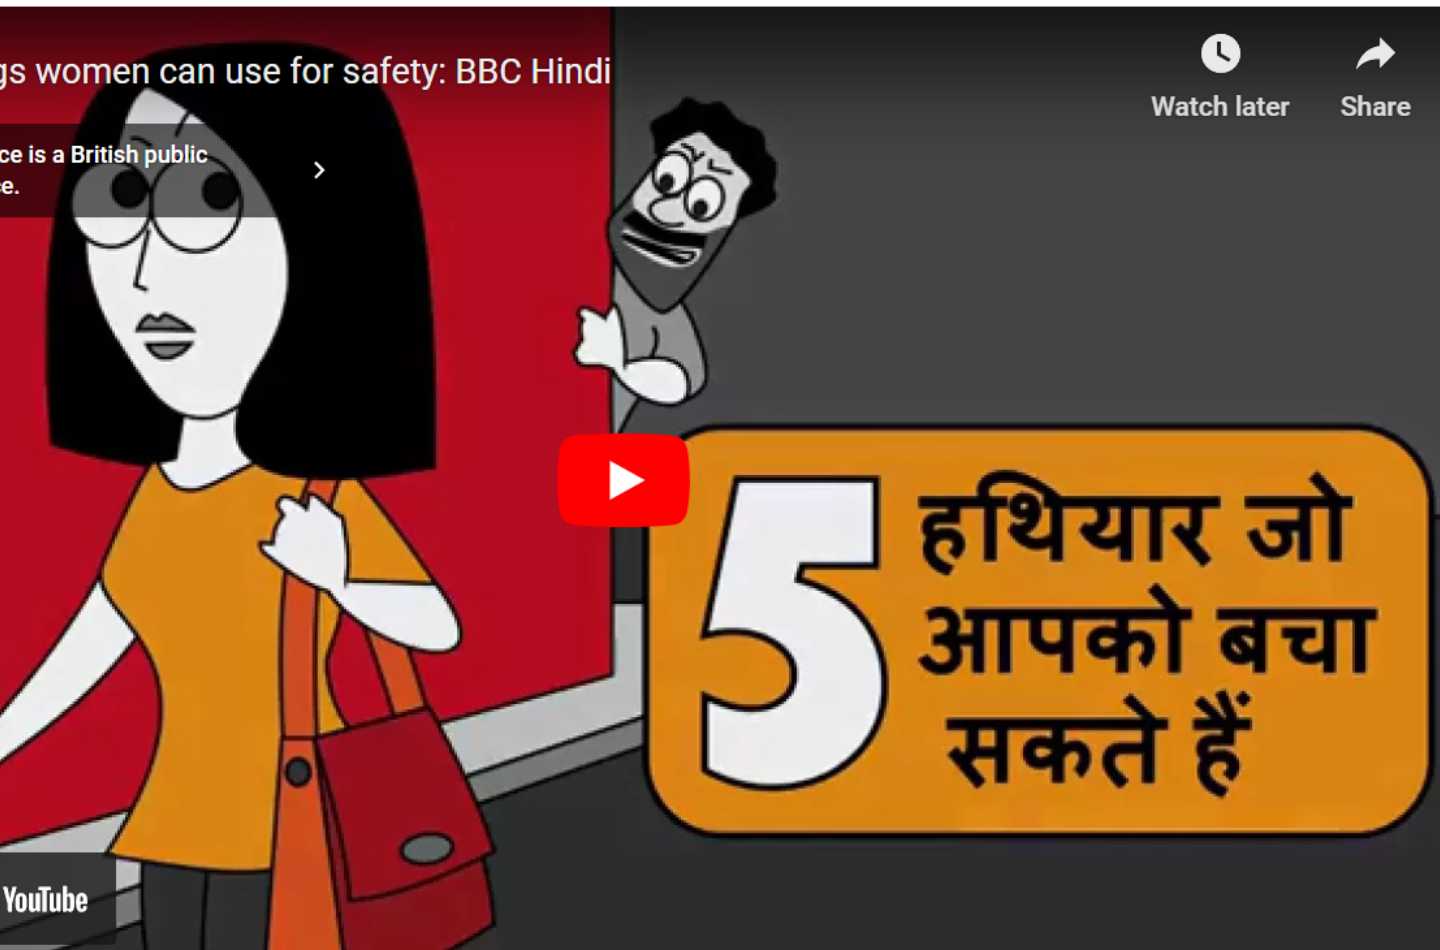 5 things women can use for safety: BBC Hindi